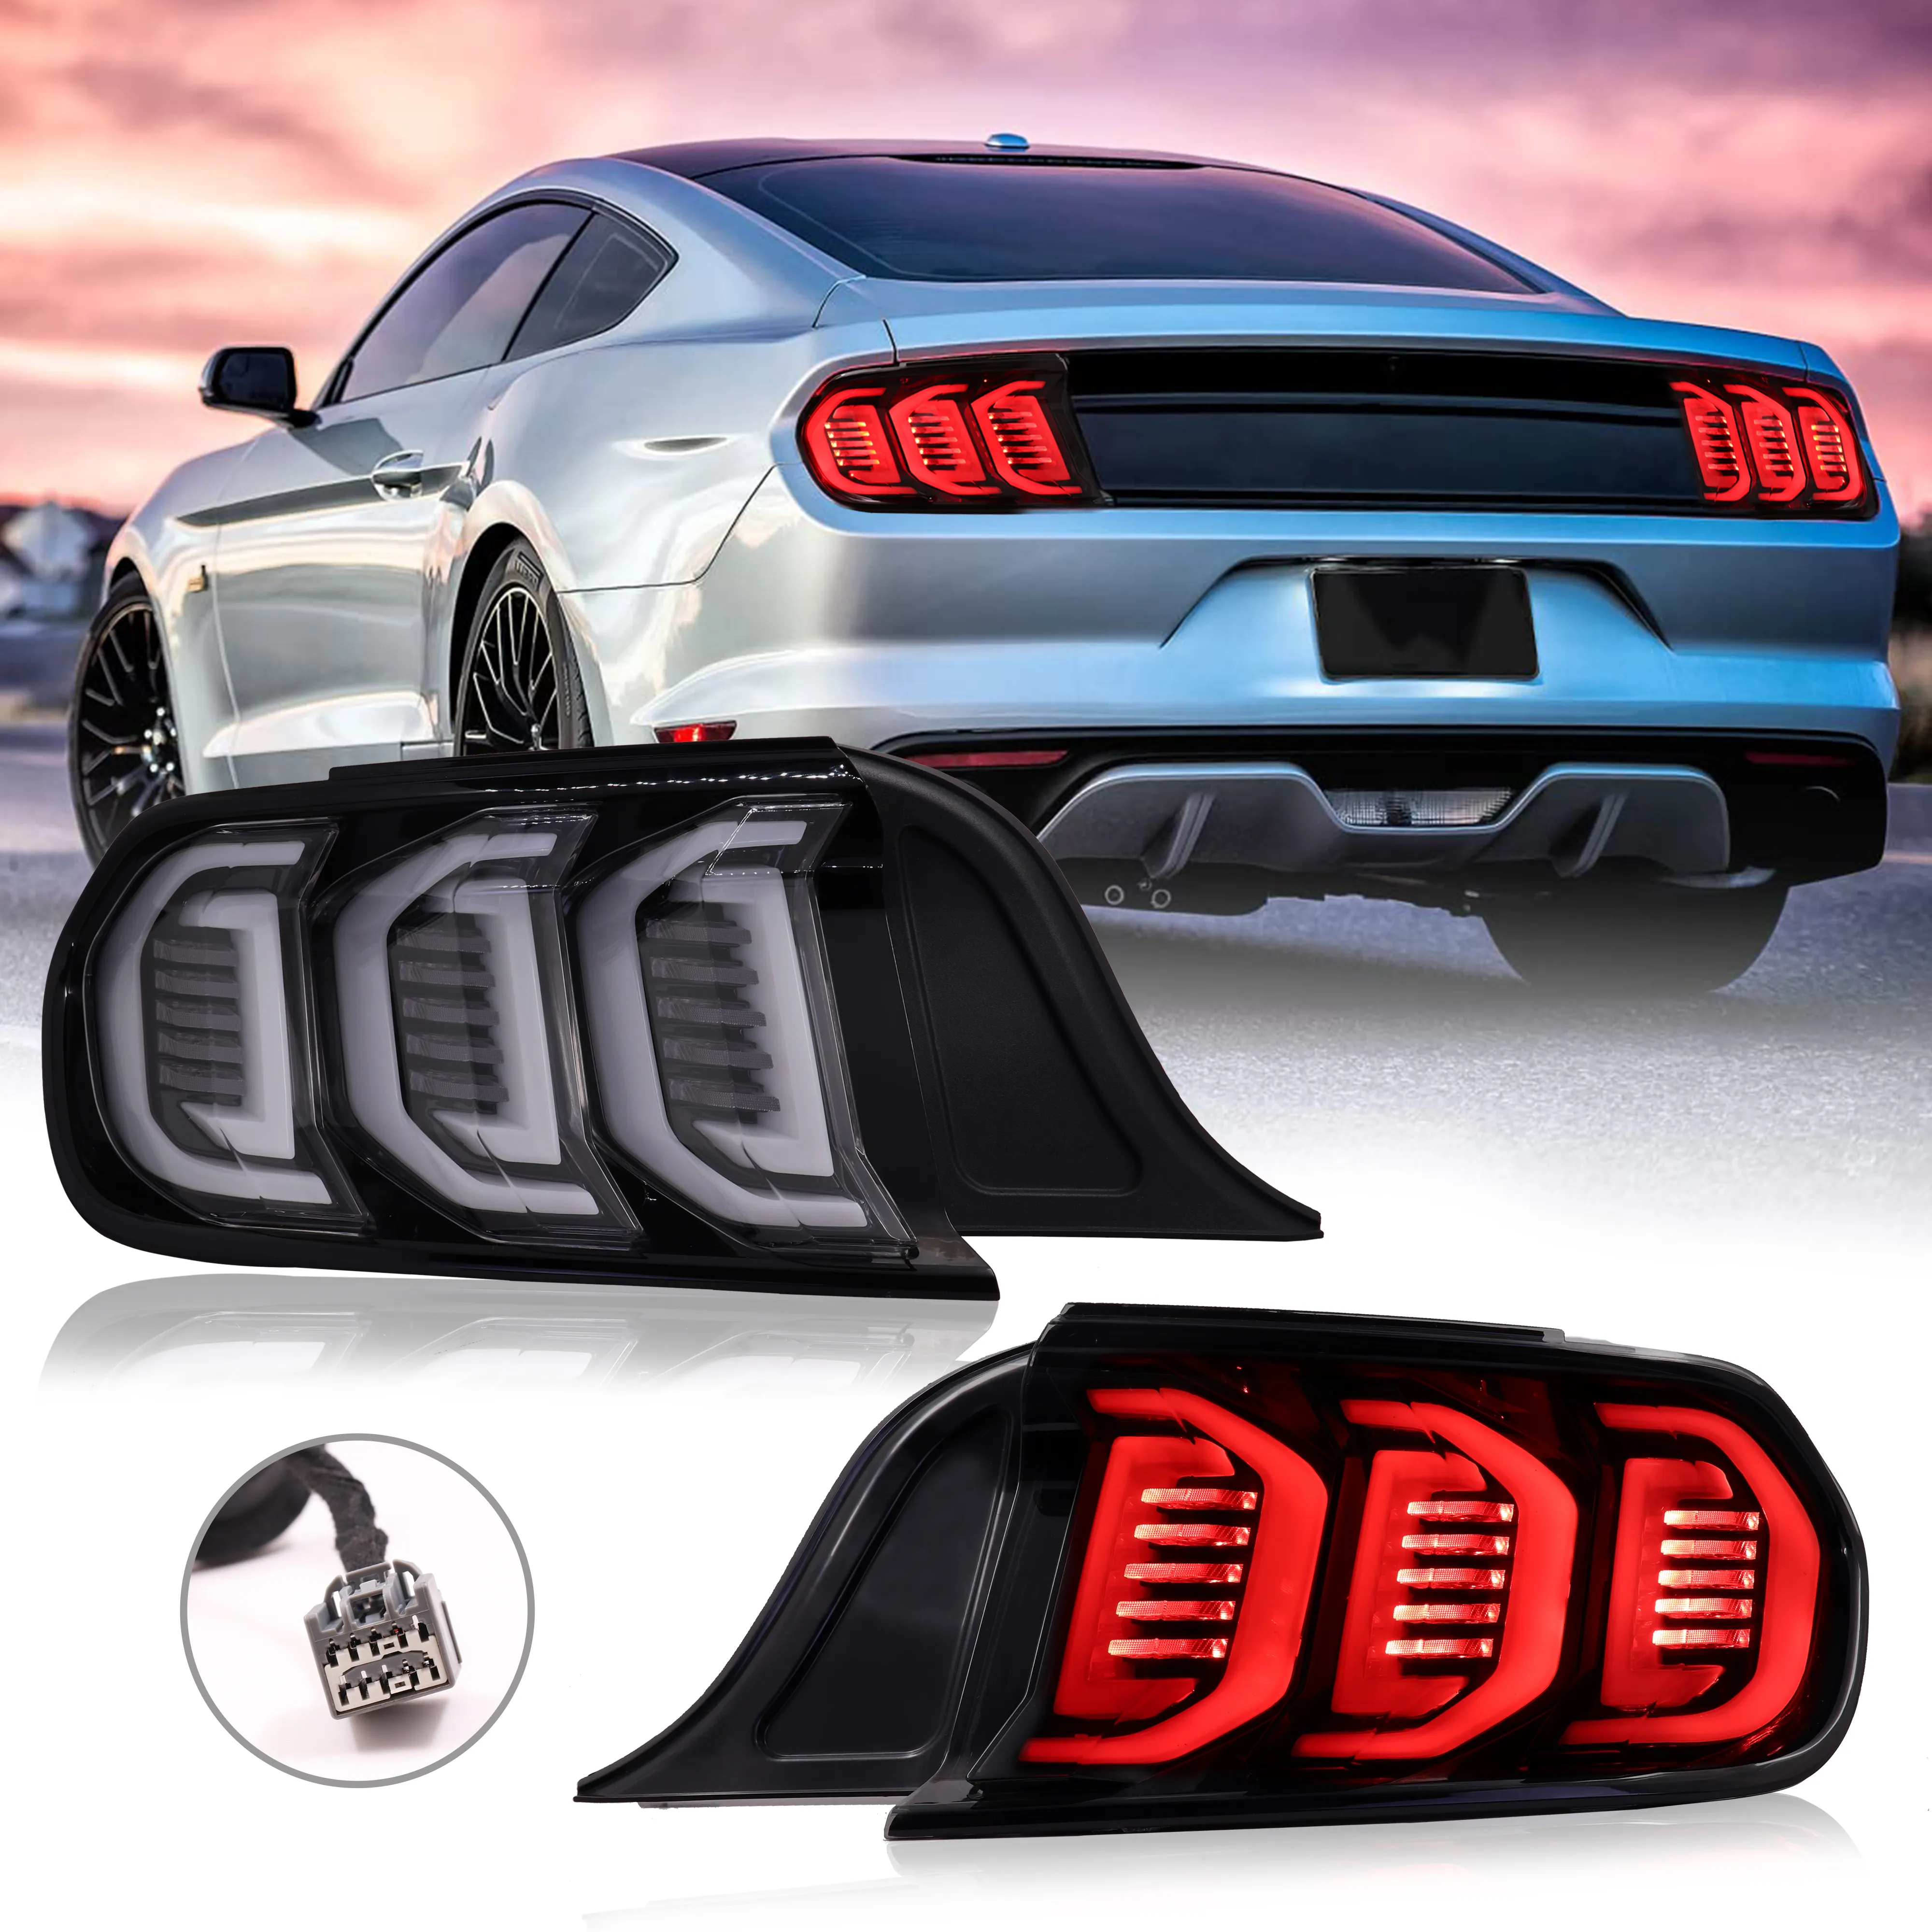 FARWIDE Smoke Clear Retrofit Tail Lamp Led Light Taililght For Ford Mustang 2015 2016 2017 2018 2019 2020 2021